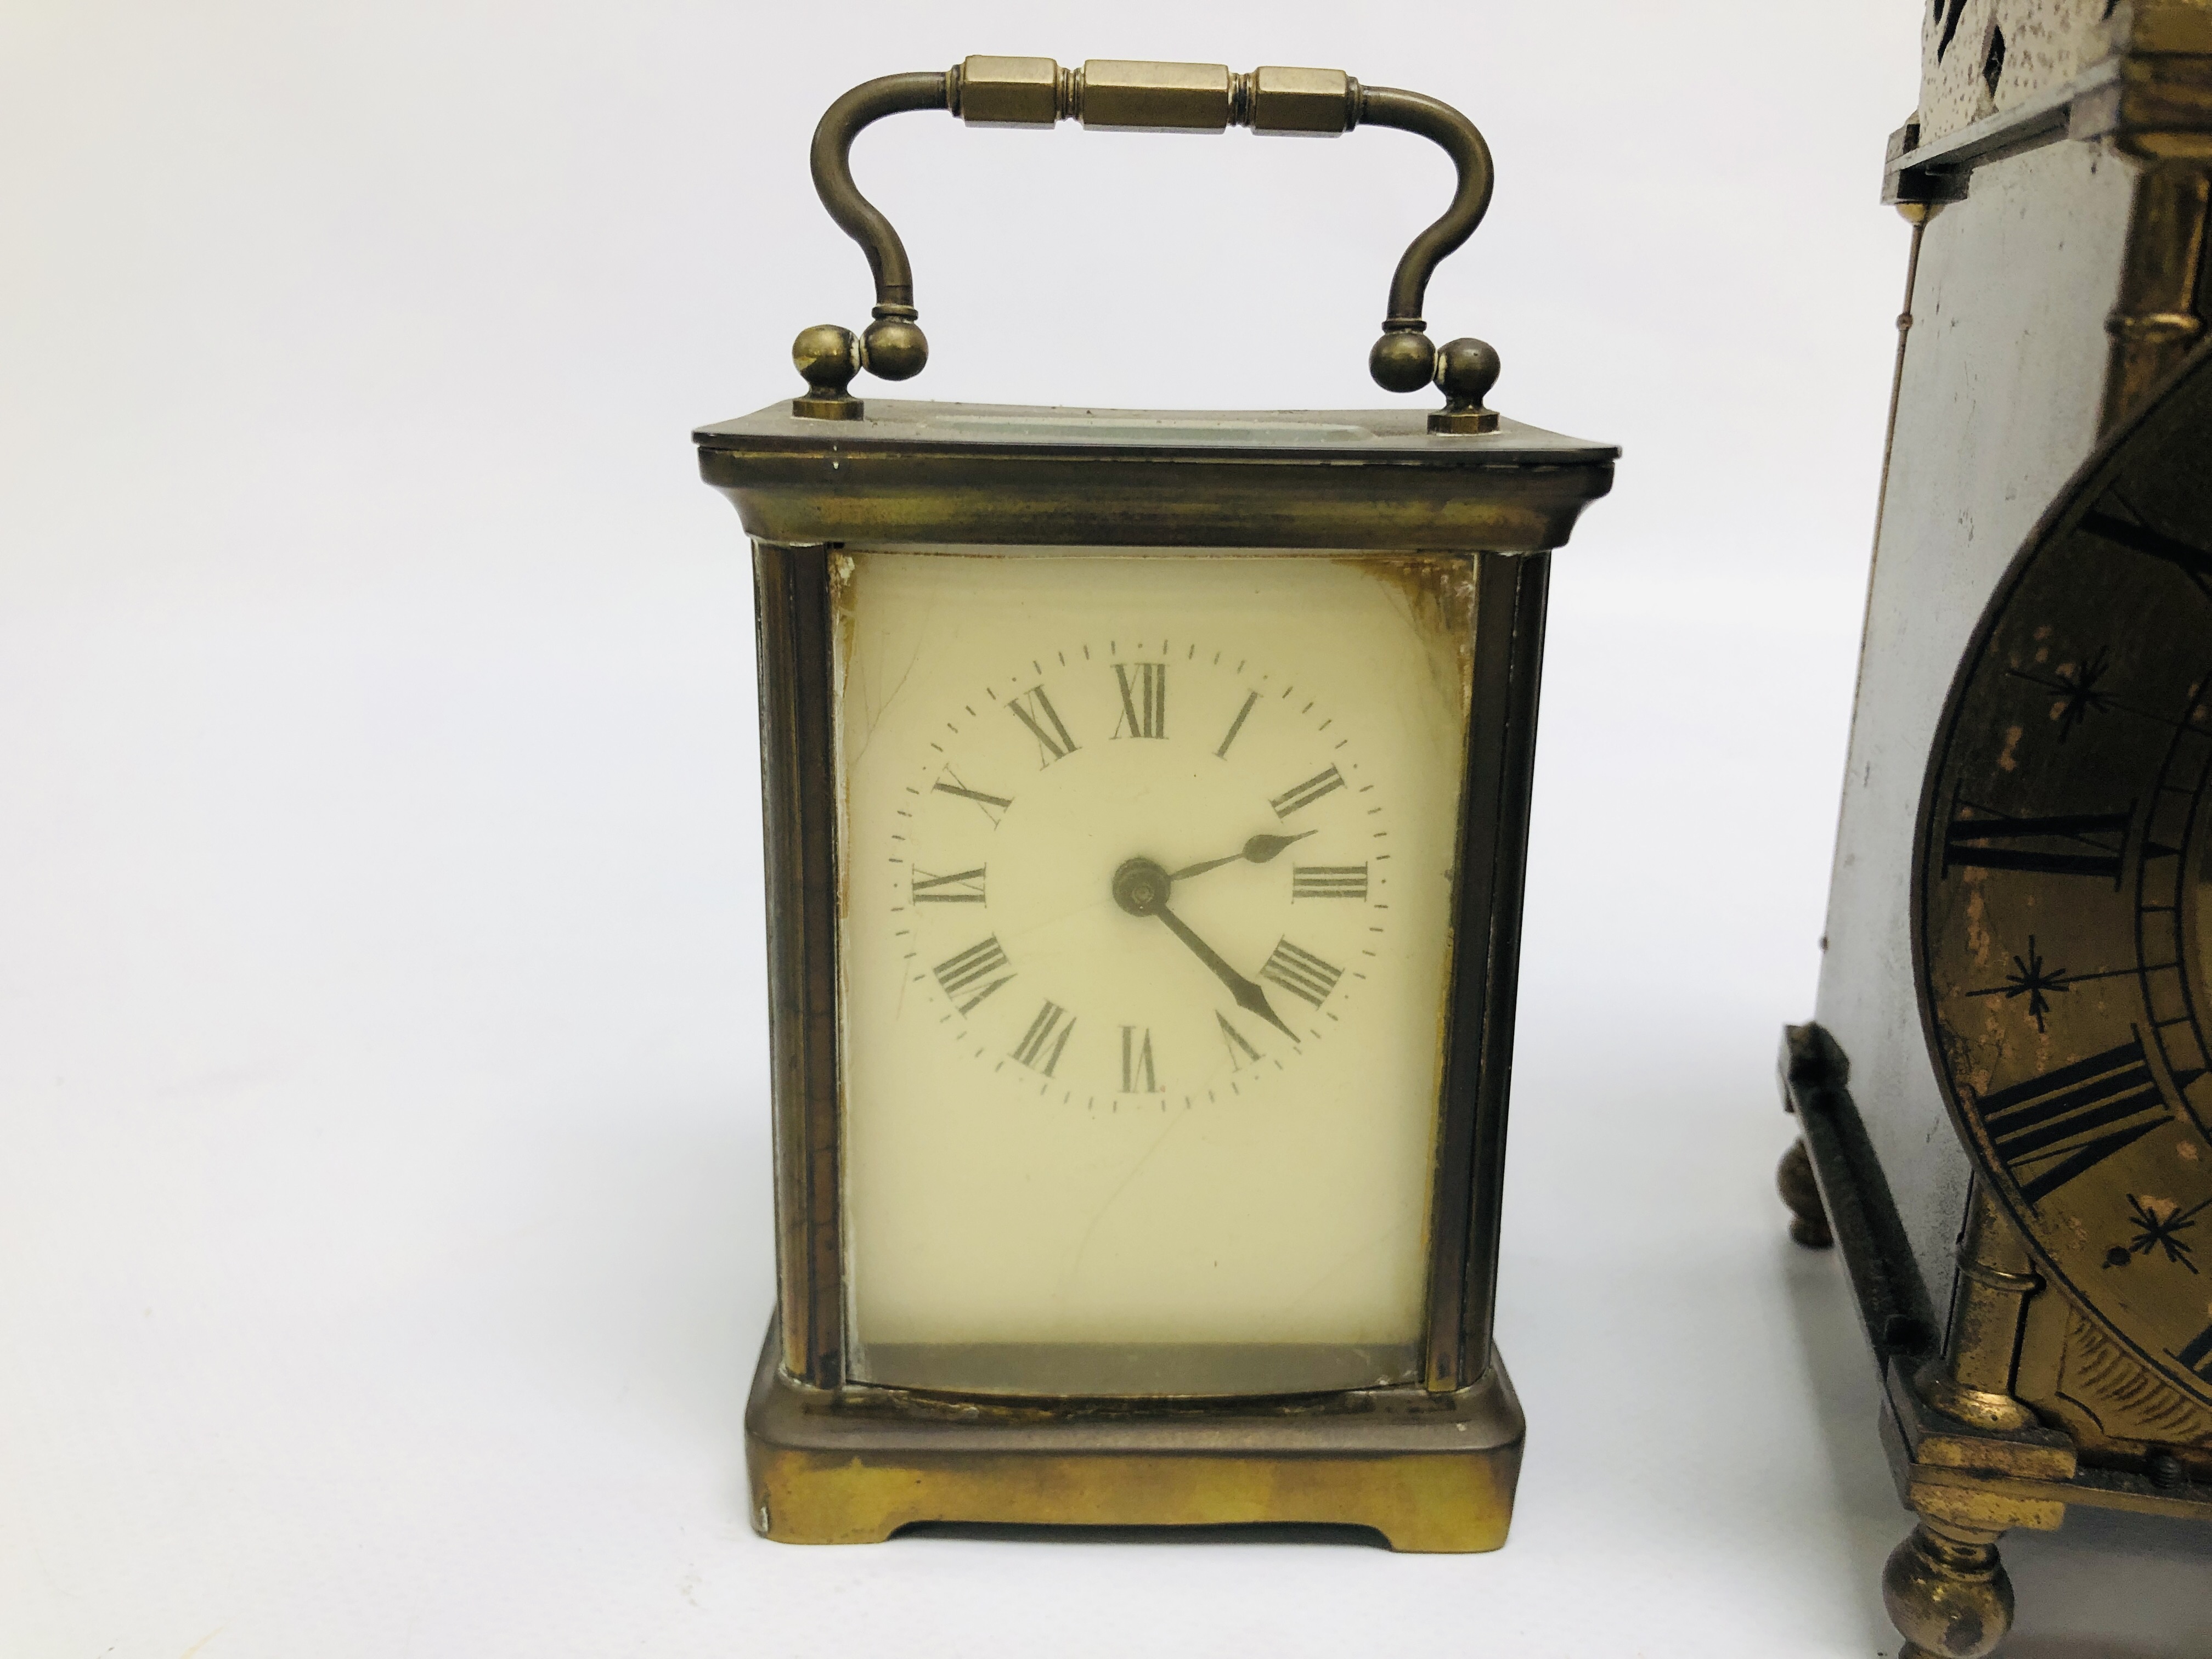 A FRENCH CARRIAGE CLOCK, THE FACE BEING PLASTIC + A MANTEL CLOCK OF LANTERN FORM. - Image 2 of 12